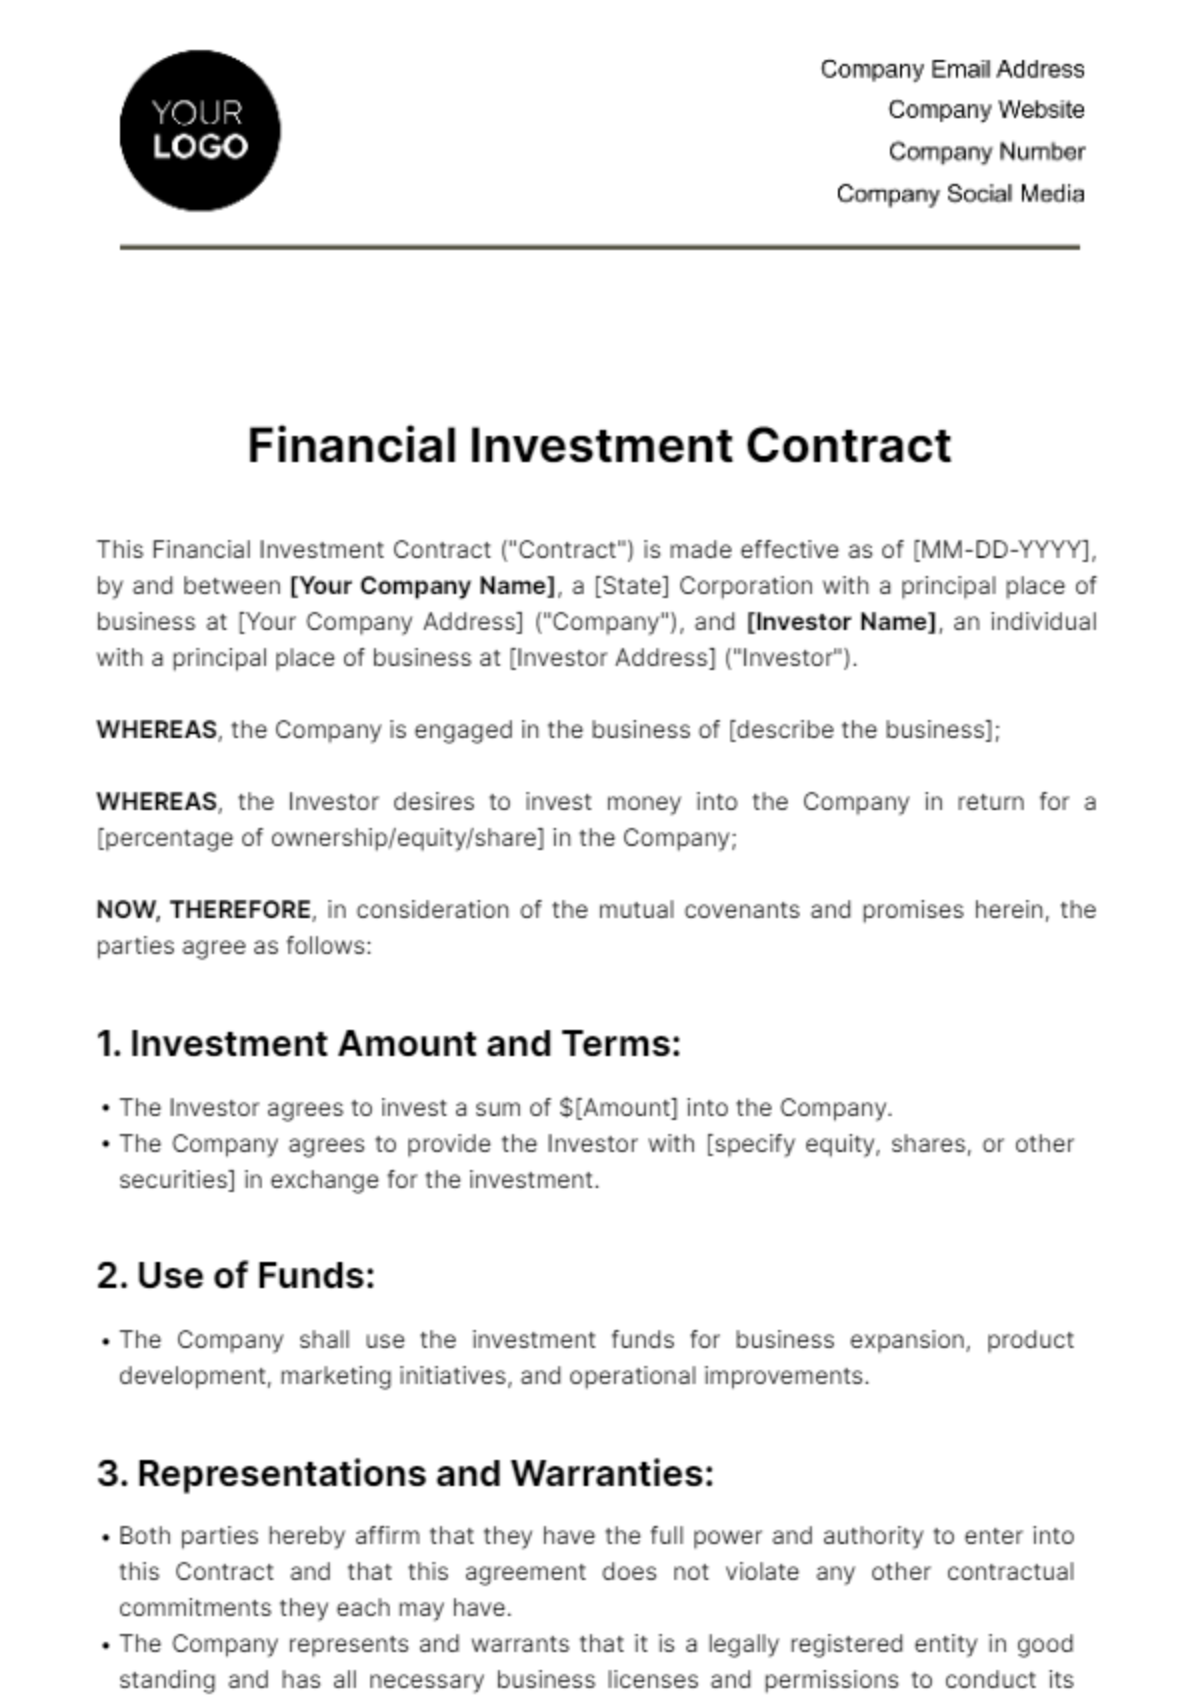 Financial Investment Contract Template